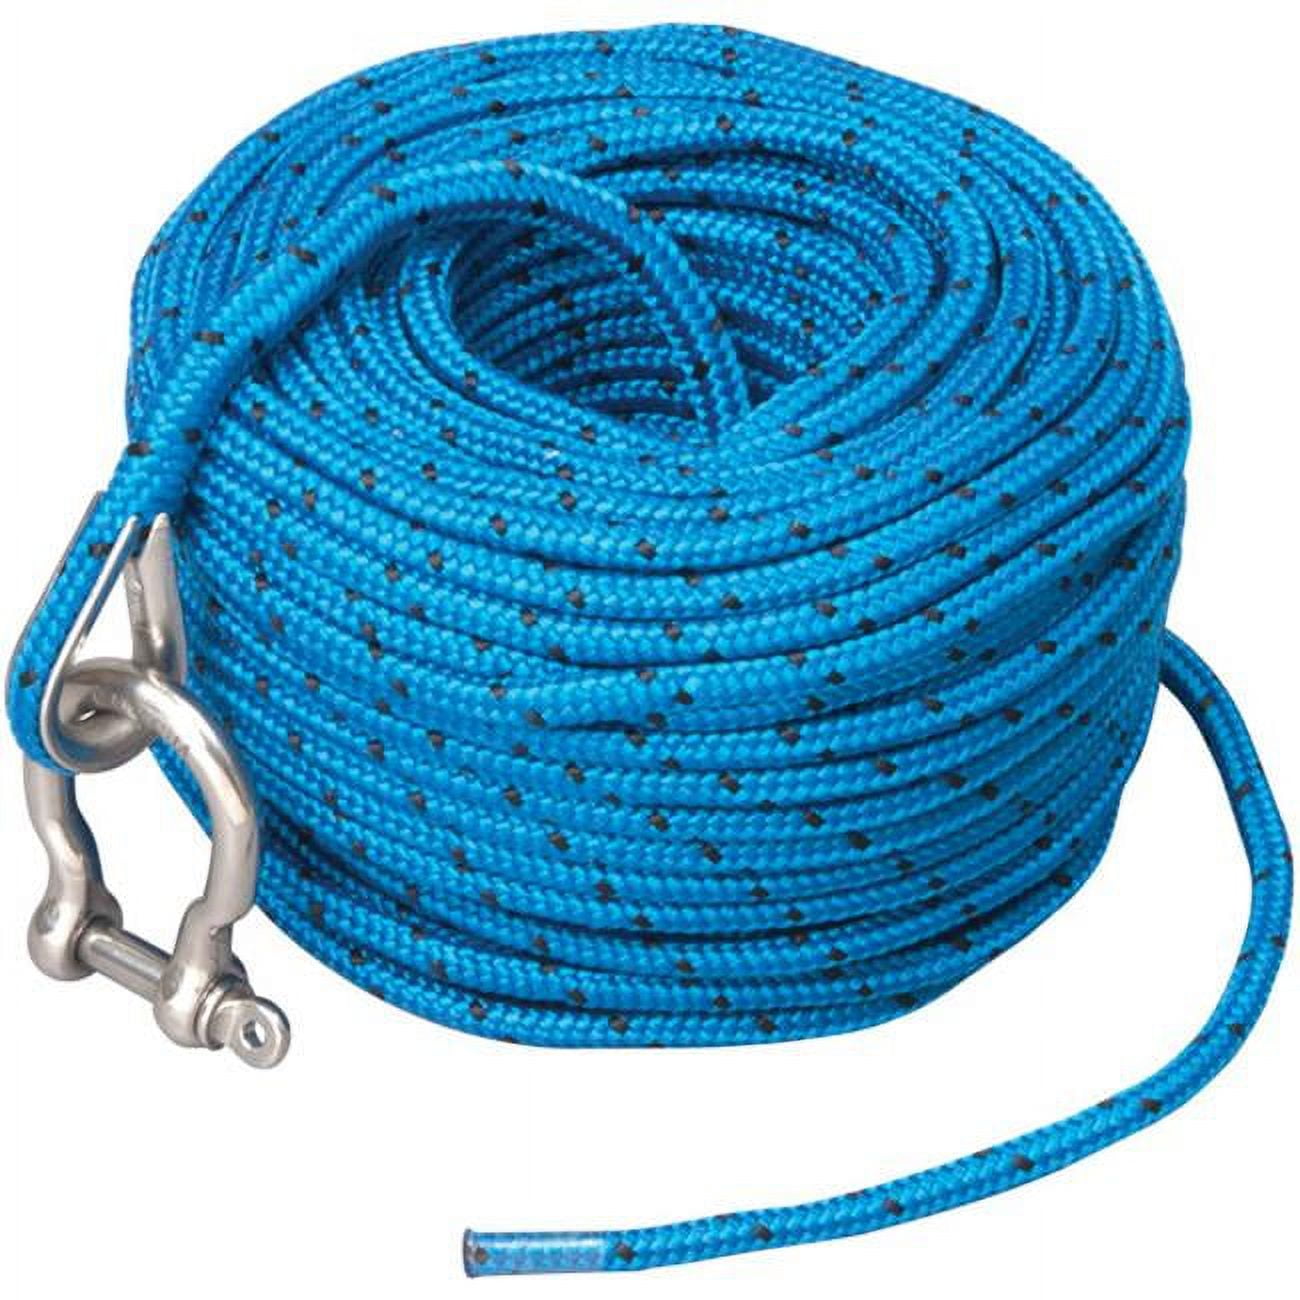 Camco Trac Outdoor 100ft Anchor Rope, Features an 800 lb. Break Strength